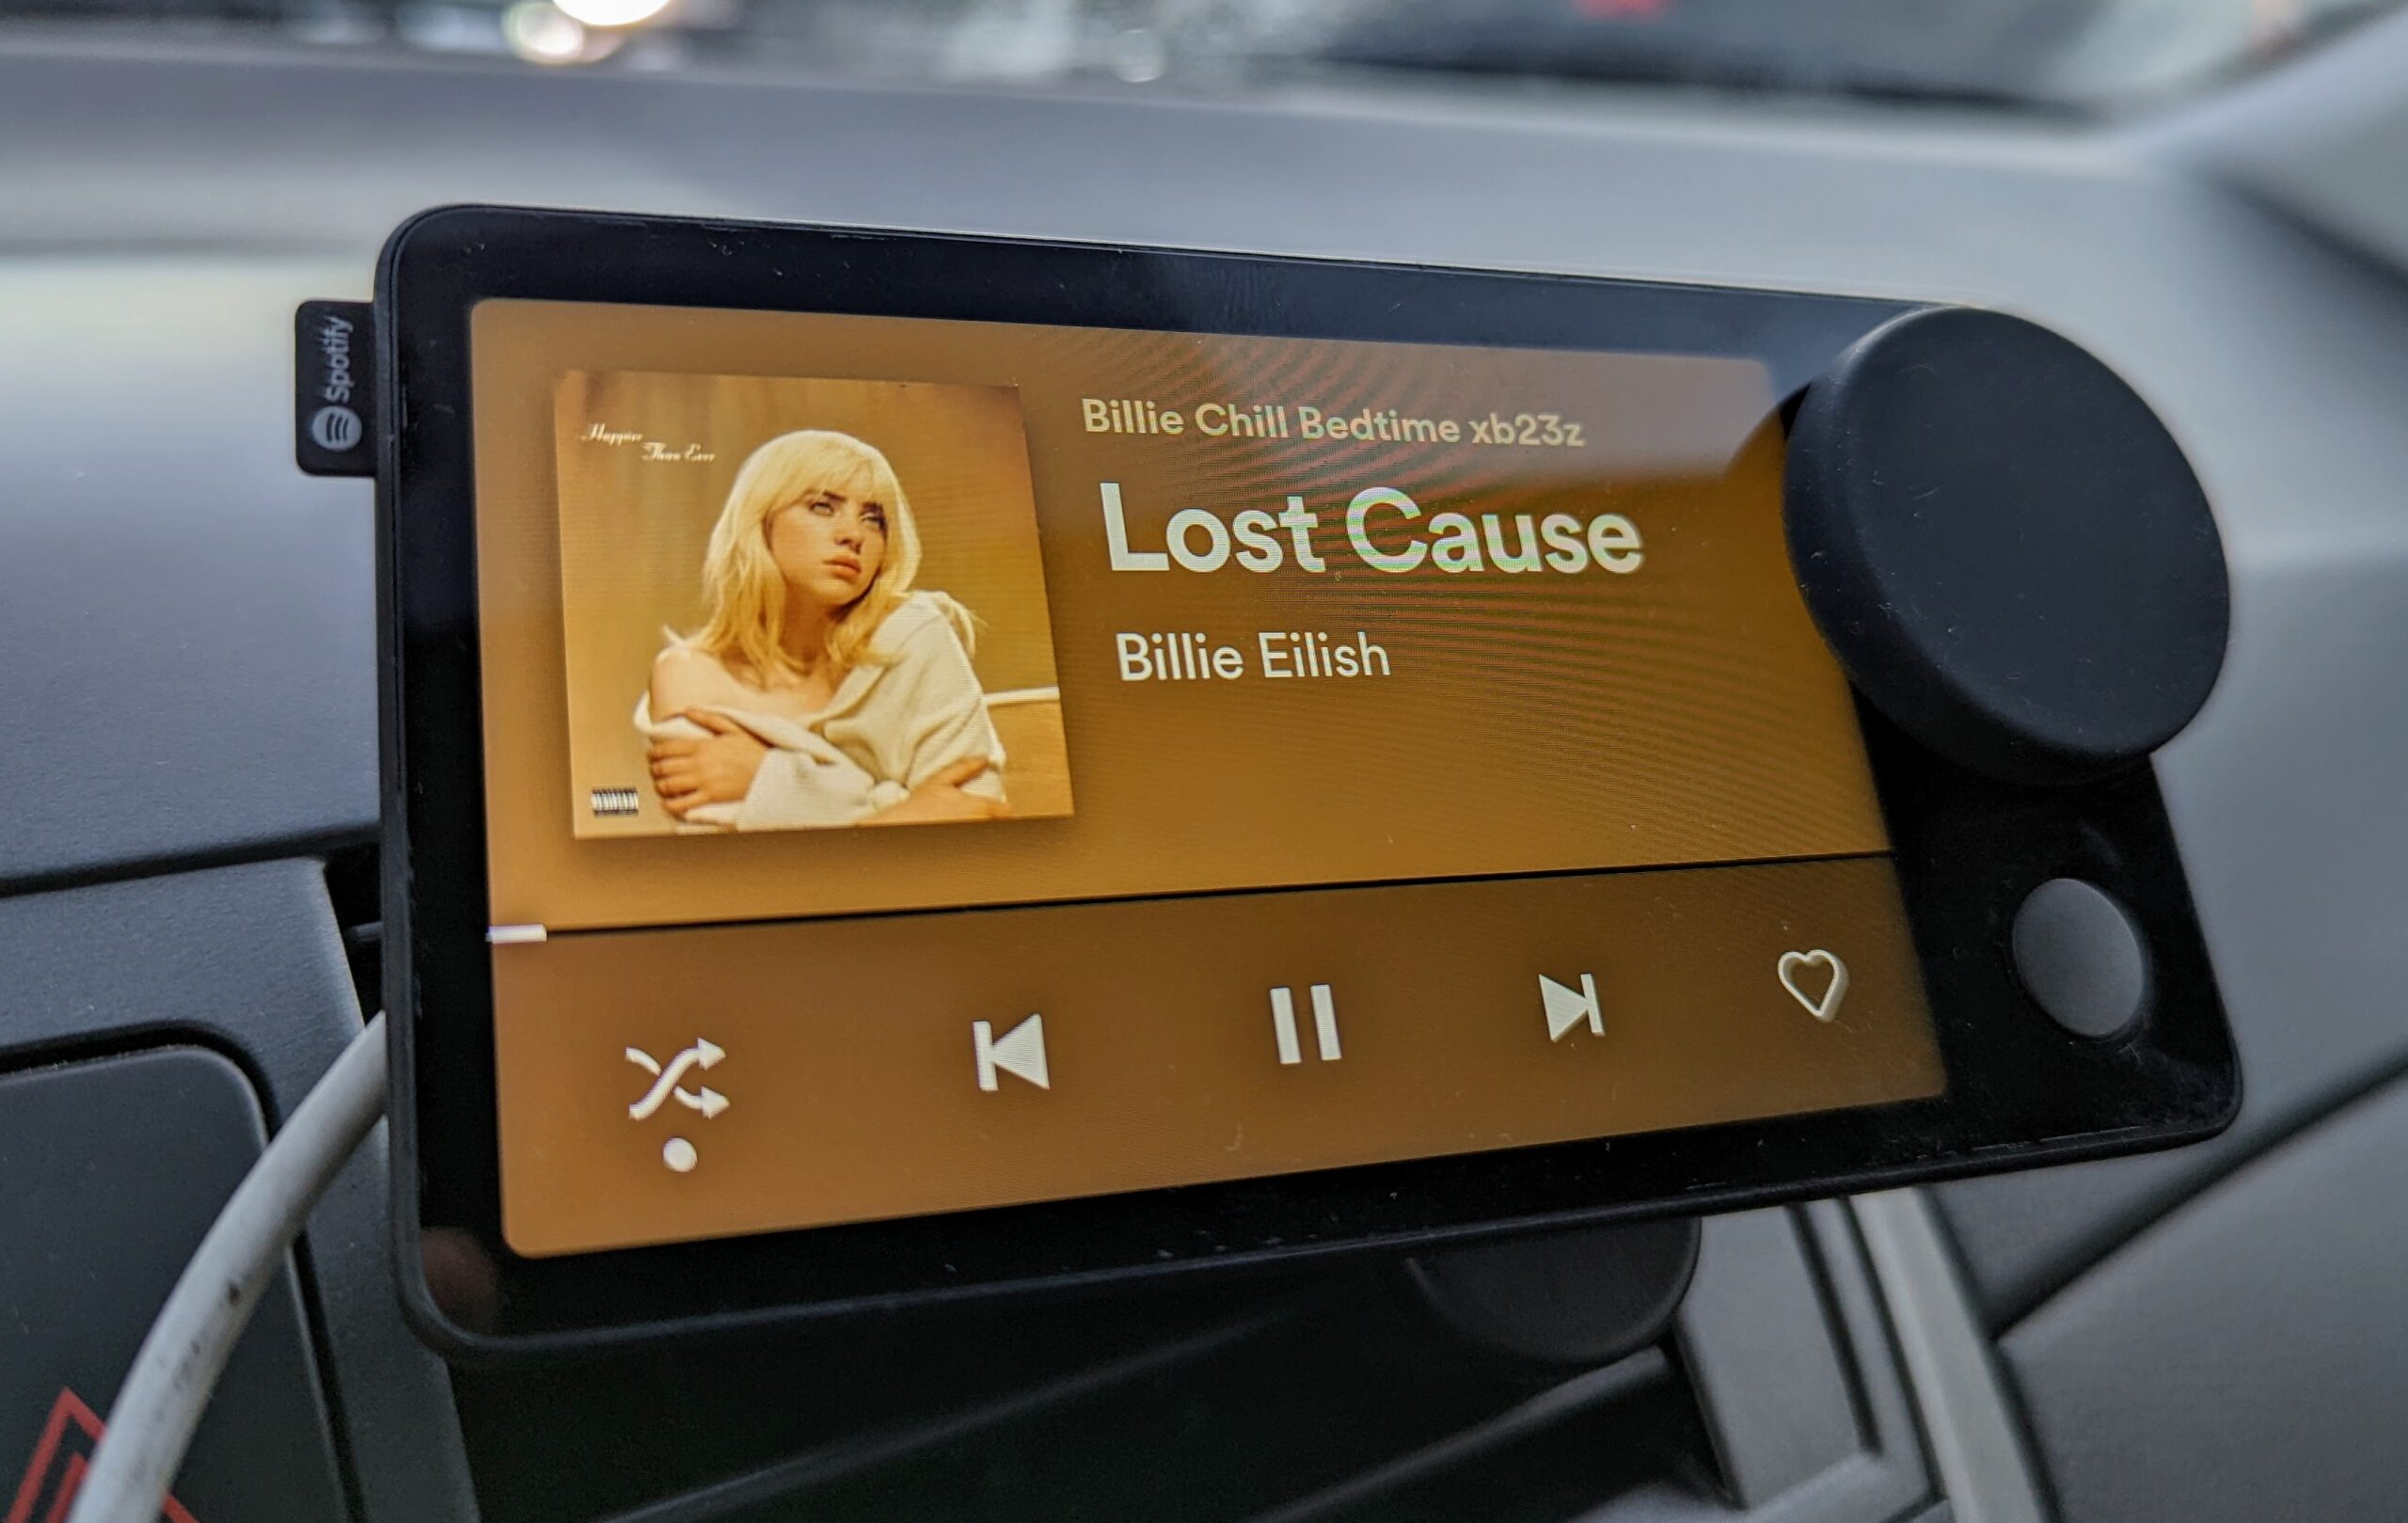 Spotify Car Thing: How to browse by voice 